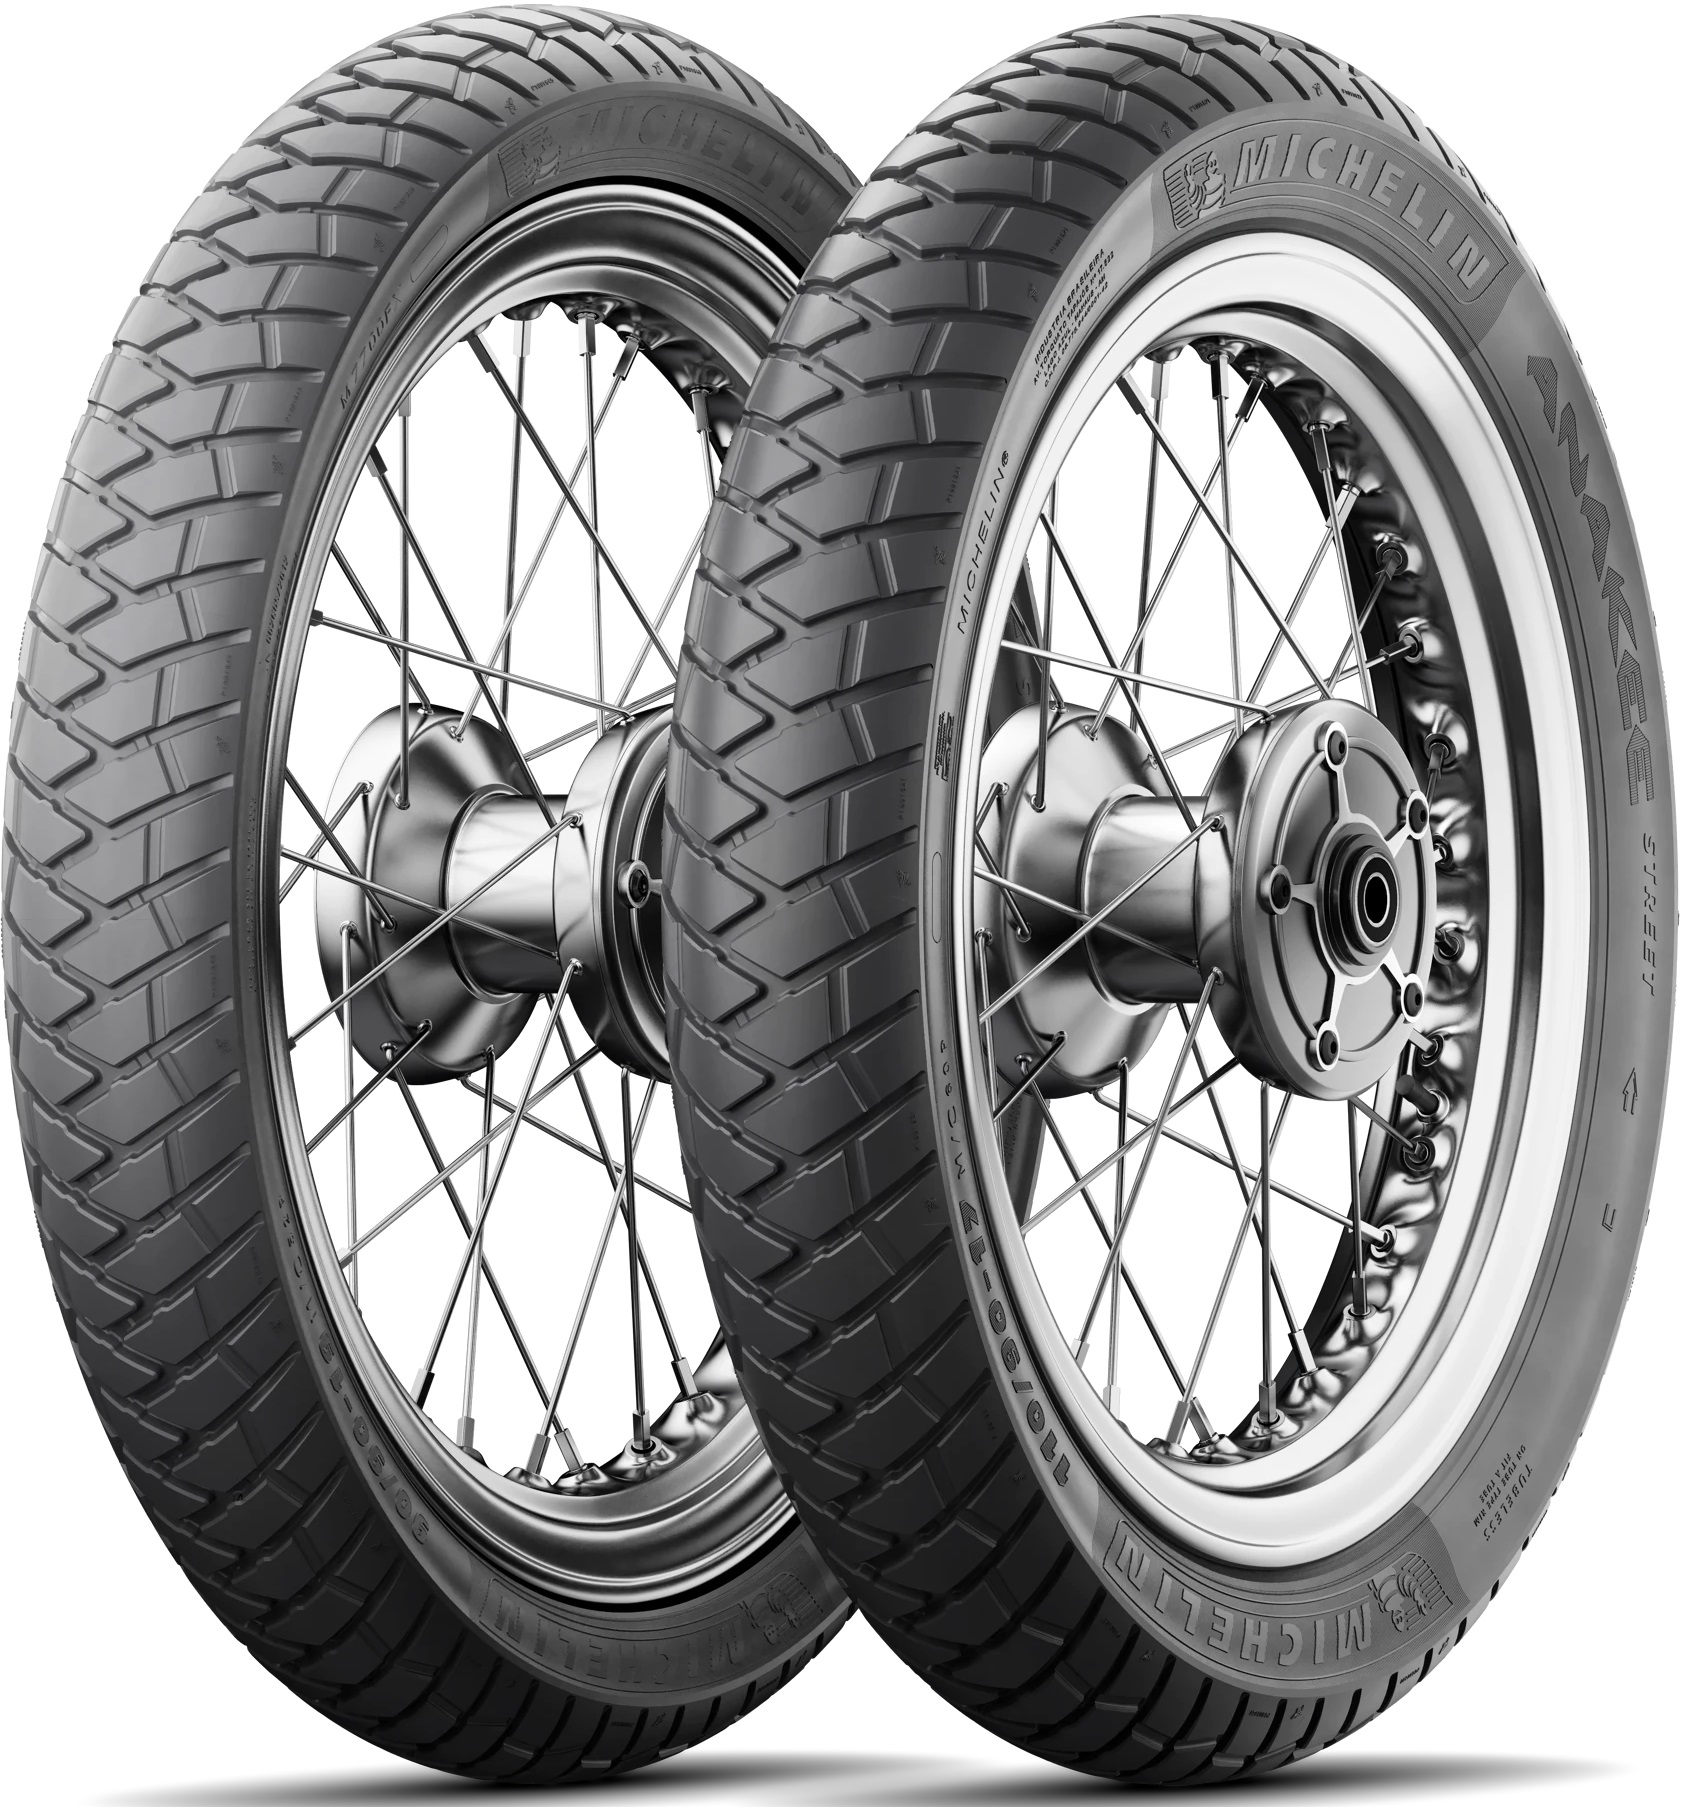 MICHELIN ANAKEE STREET 80/80 R 16 45S